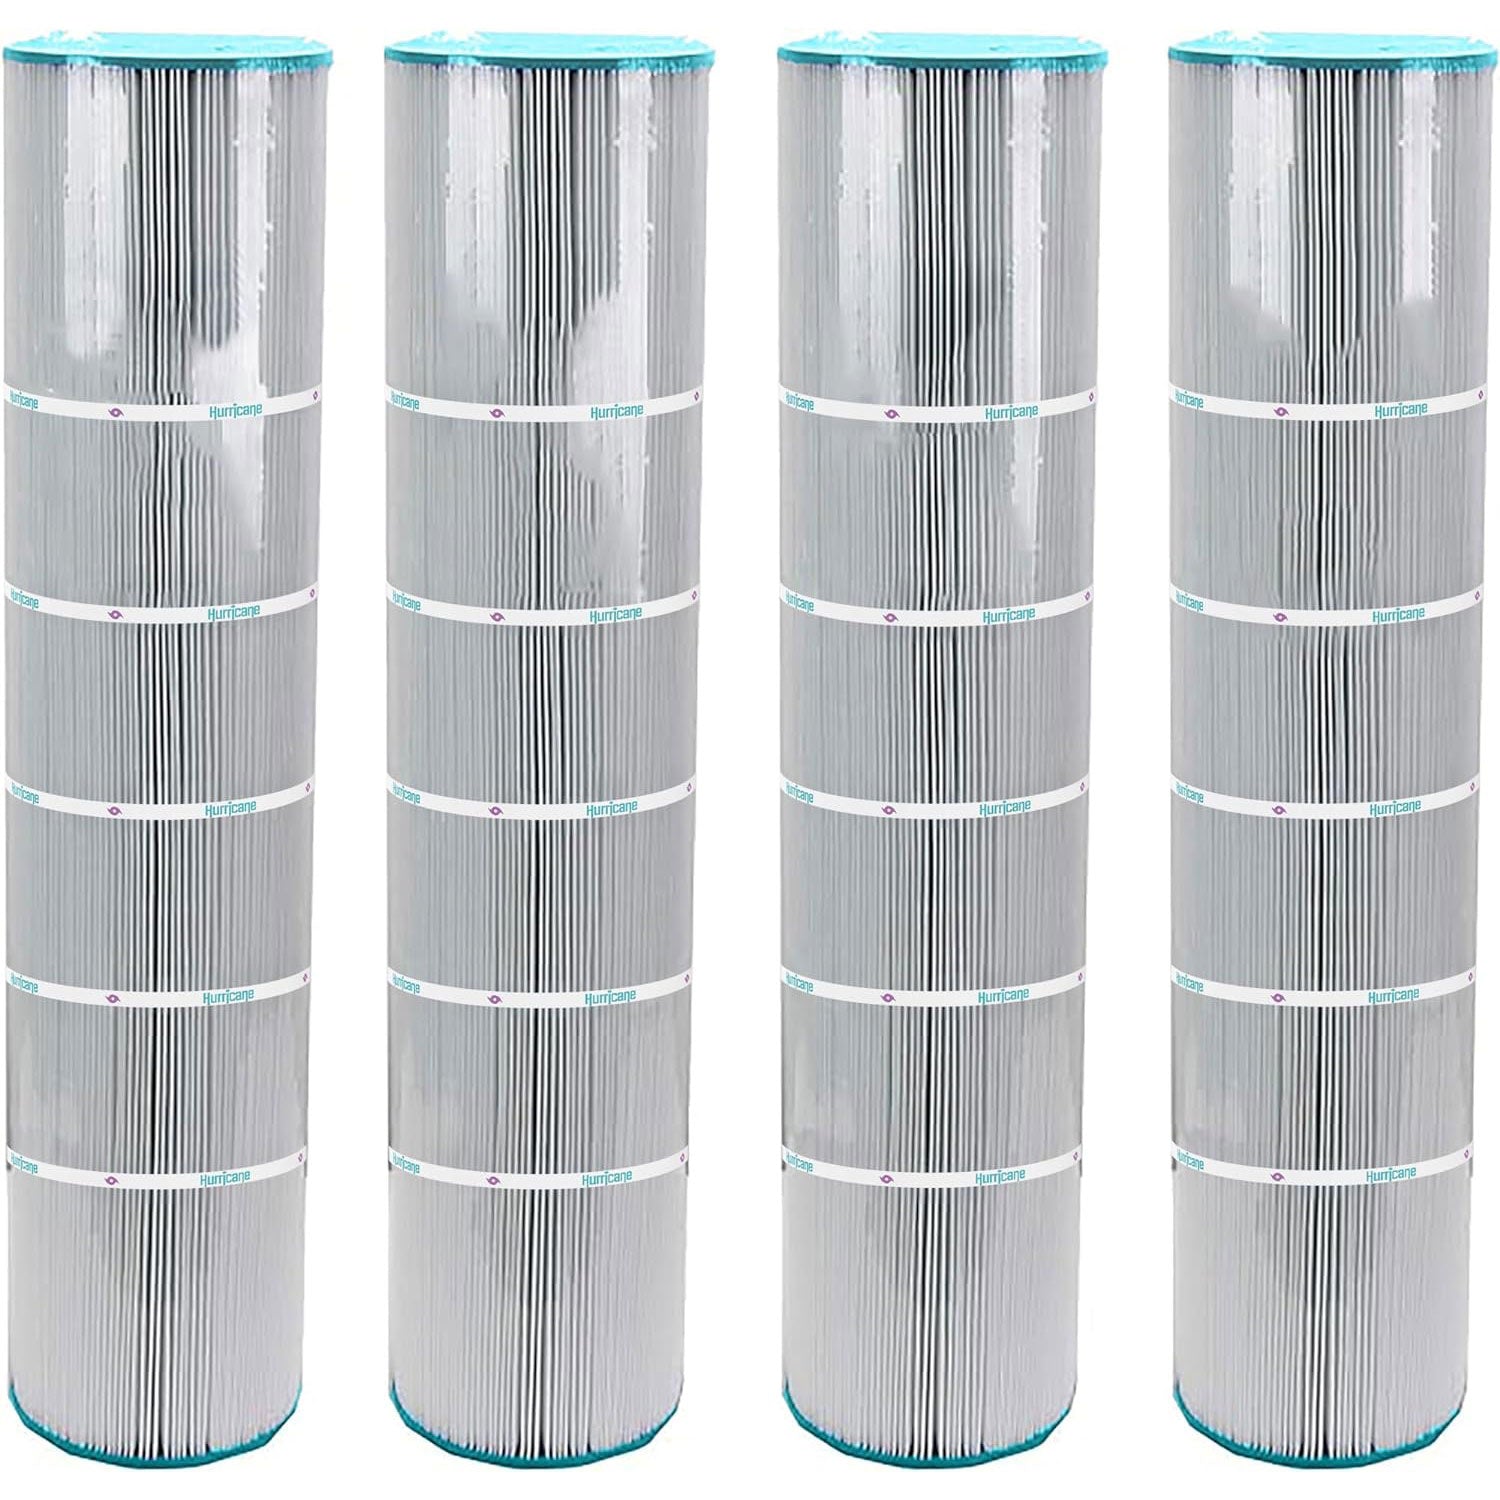  Filter Cartridge for Pentair Clean & Clear Plus 520, Waterway Crystal Water 525 (4 required) 4pk